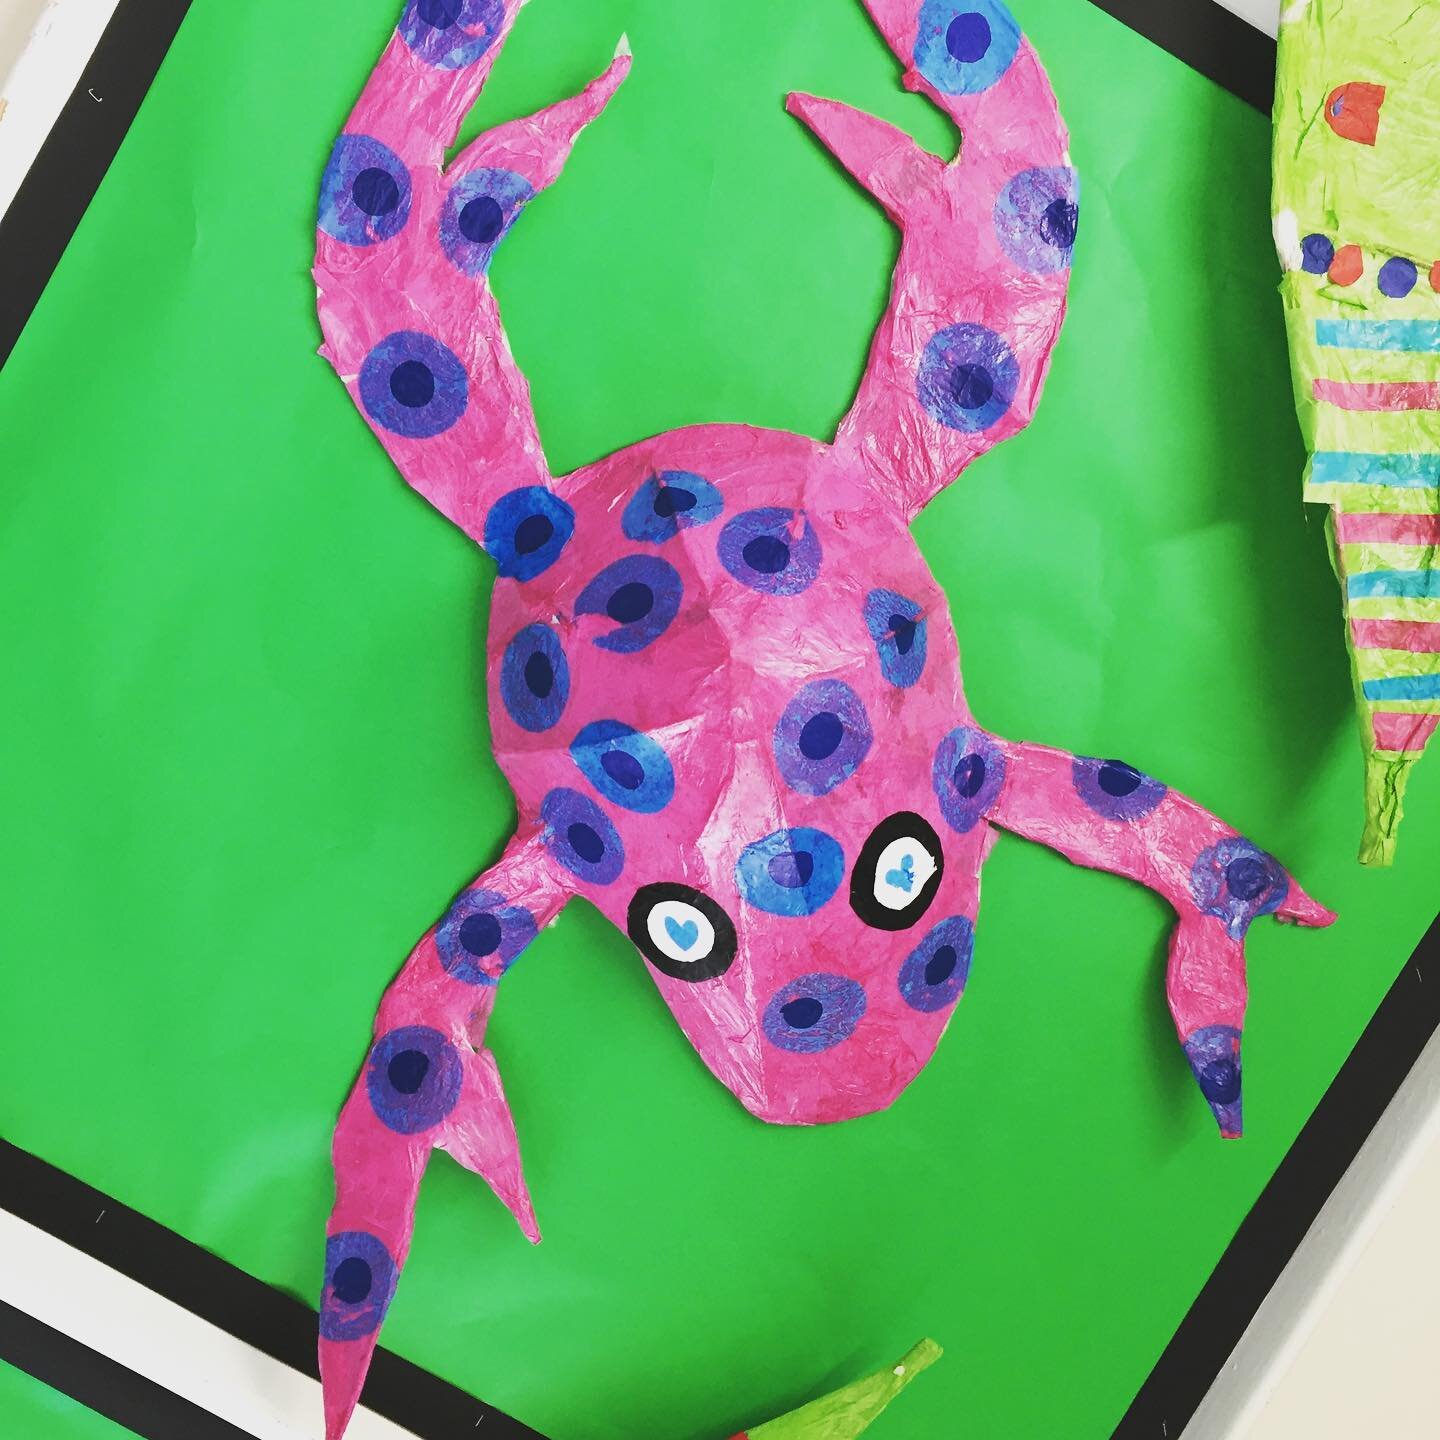 Tropical frog and crazy caterpillar combination built with willow and tissue. #schooldisplay #primaryschoolart #schoolartworkshops #primaryschool #artworkshop #frogs #catterpillar #colourful #sculpture #theschoolartist